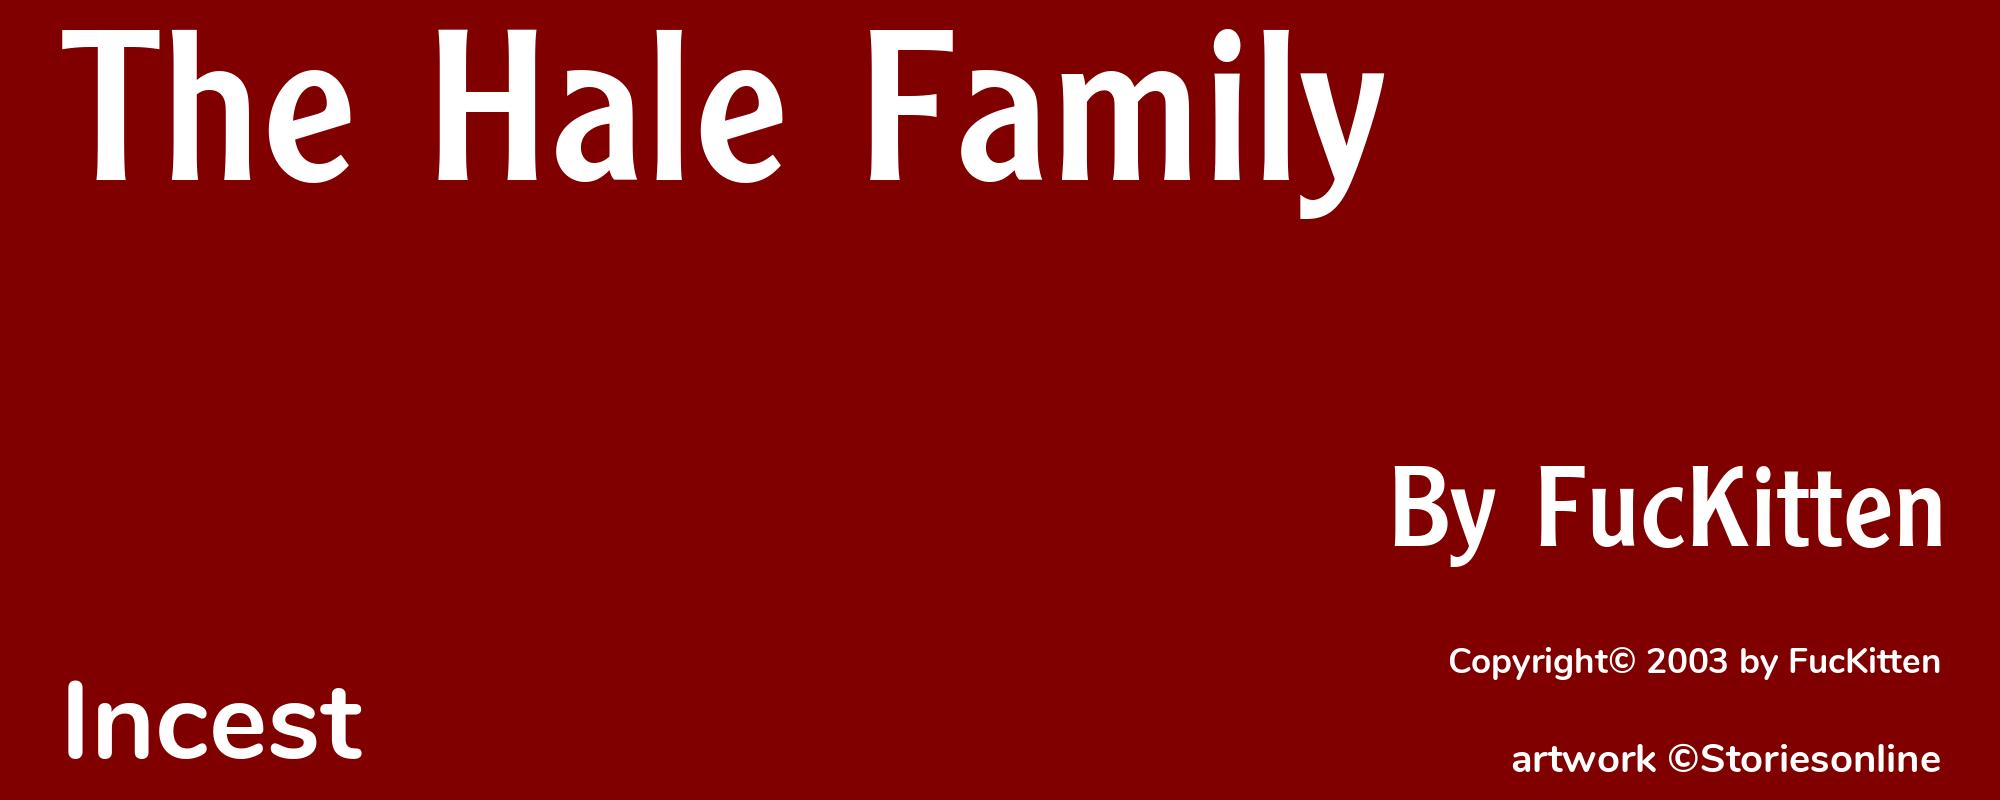 The Hale Family - Cover